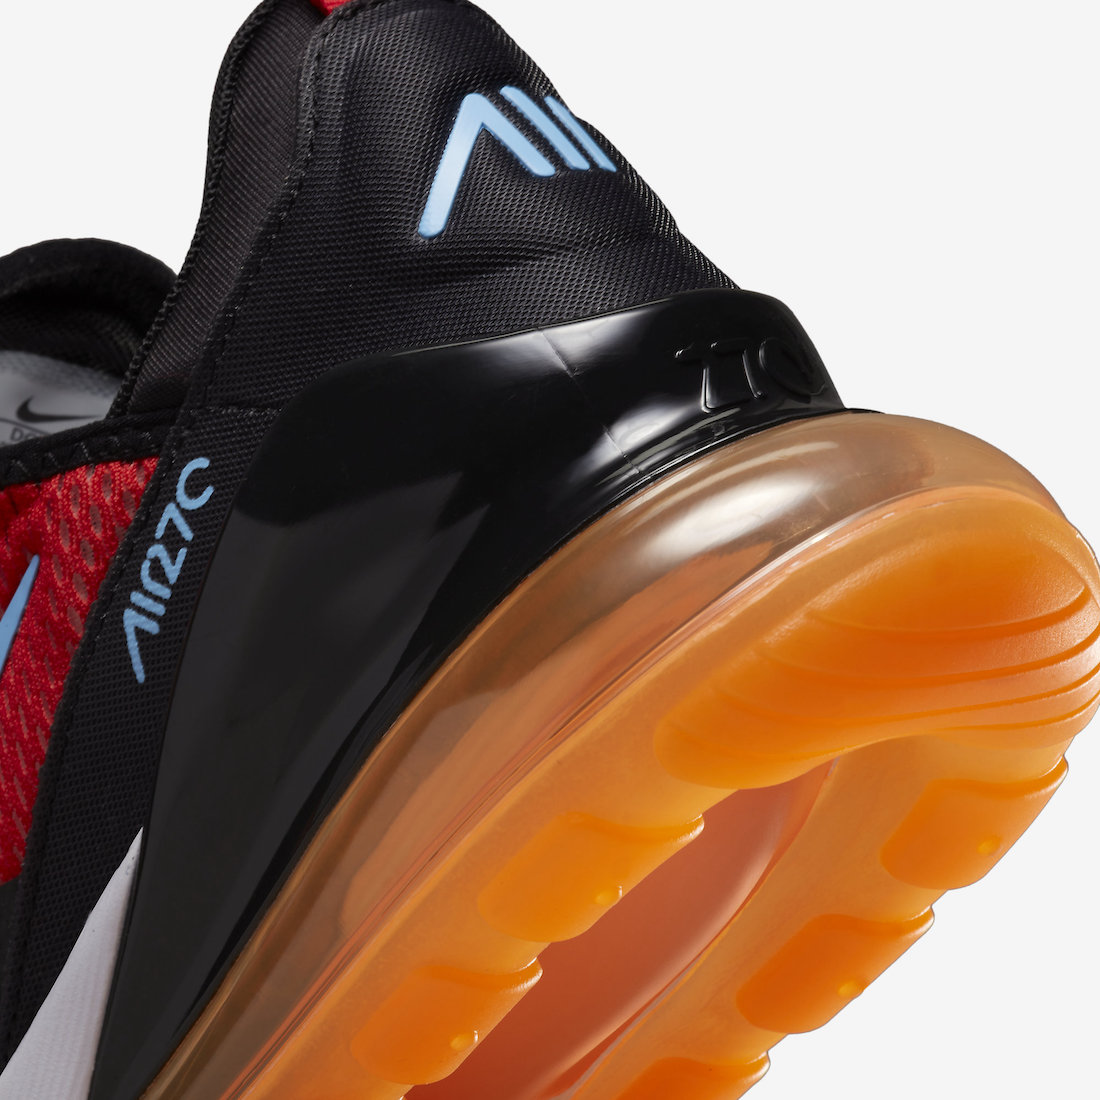 Nike Air Max 270 Sunset DQ7625-600 Release Date